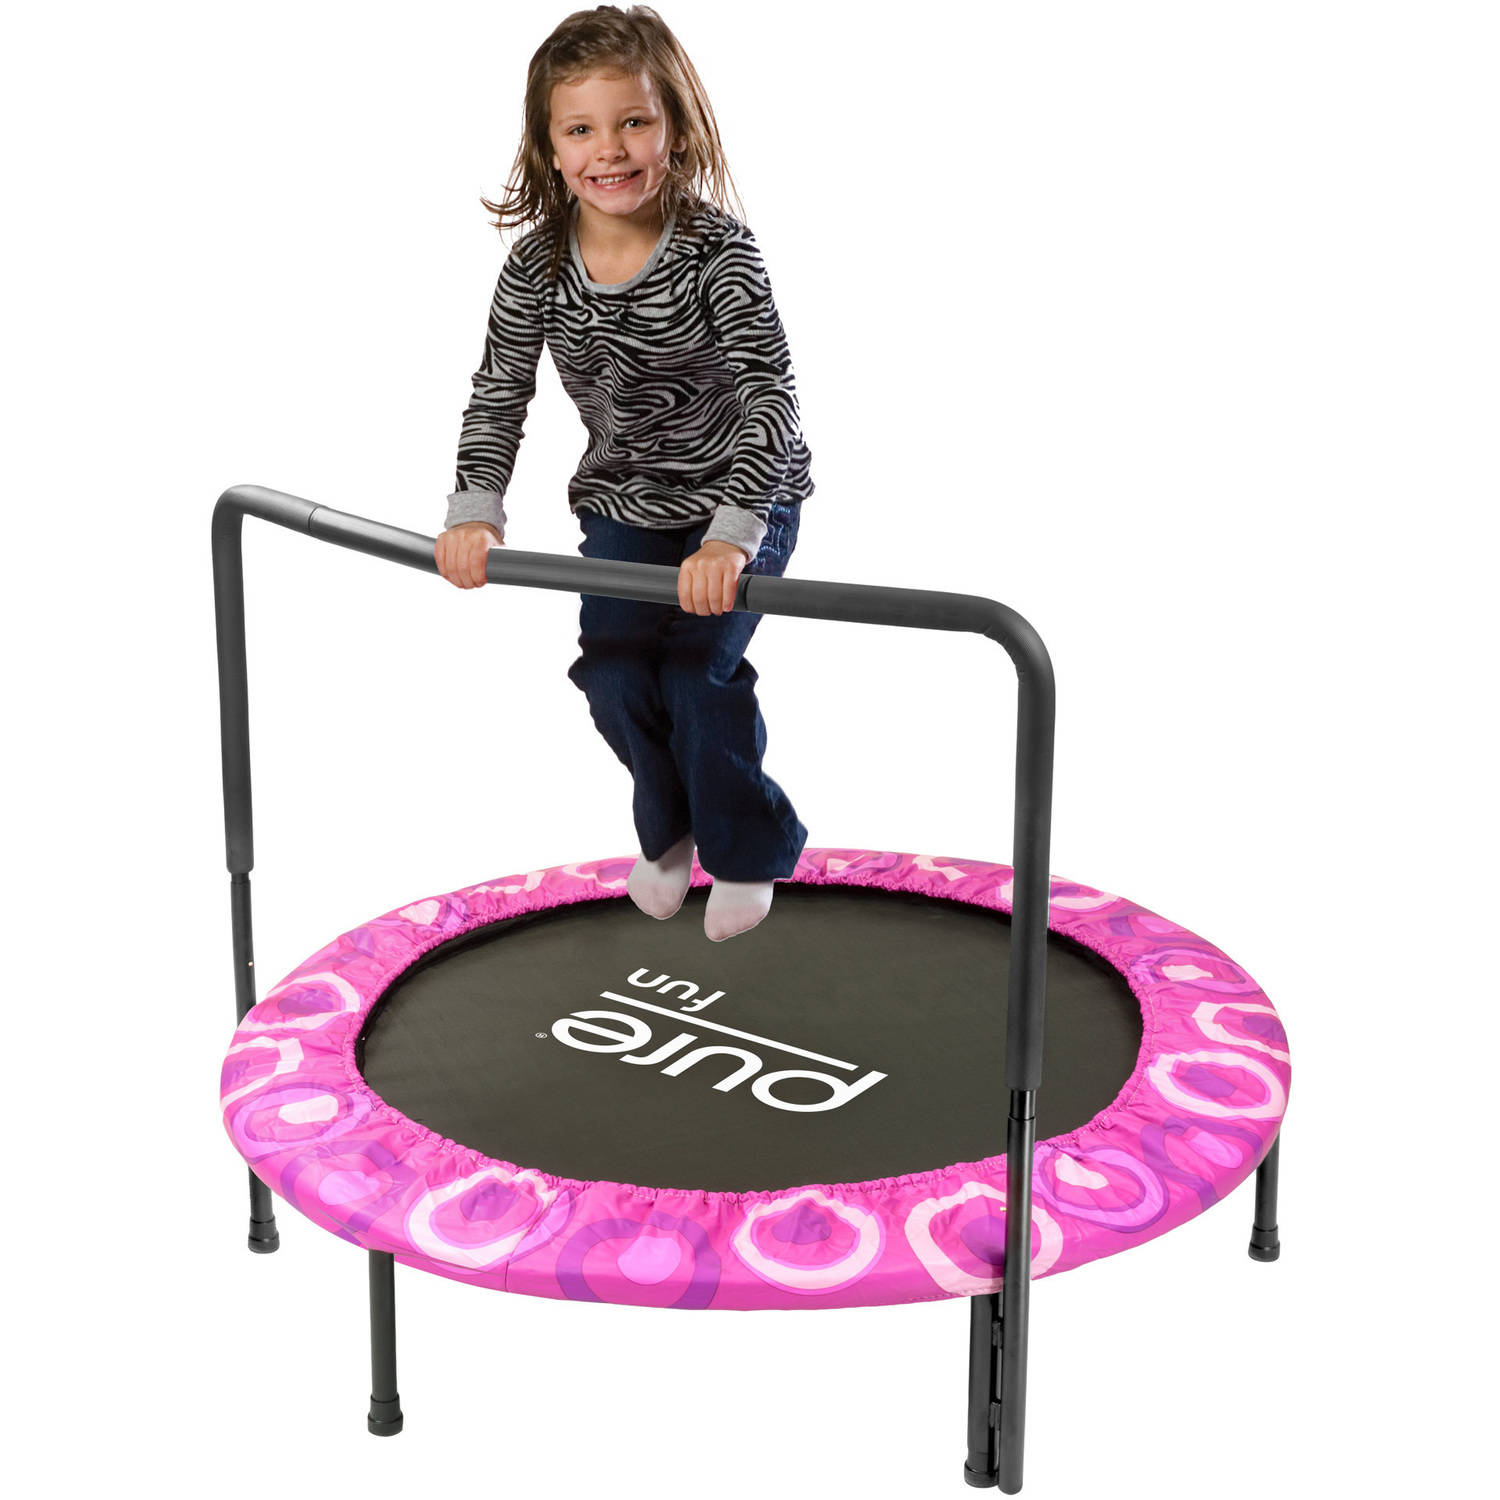 Pure Fun Super Jumper Kids 48-Inch Trampoline with Handrail, Pink, 100lb Weight Limit - image 1 of 6